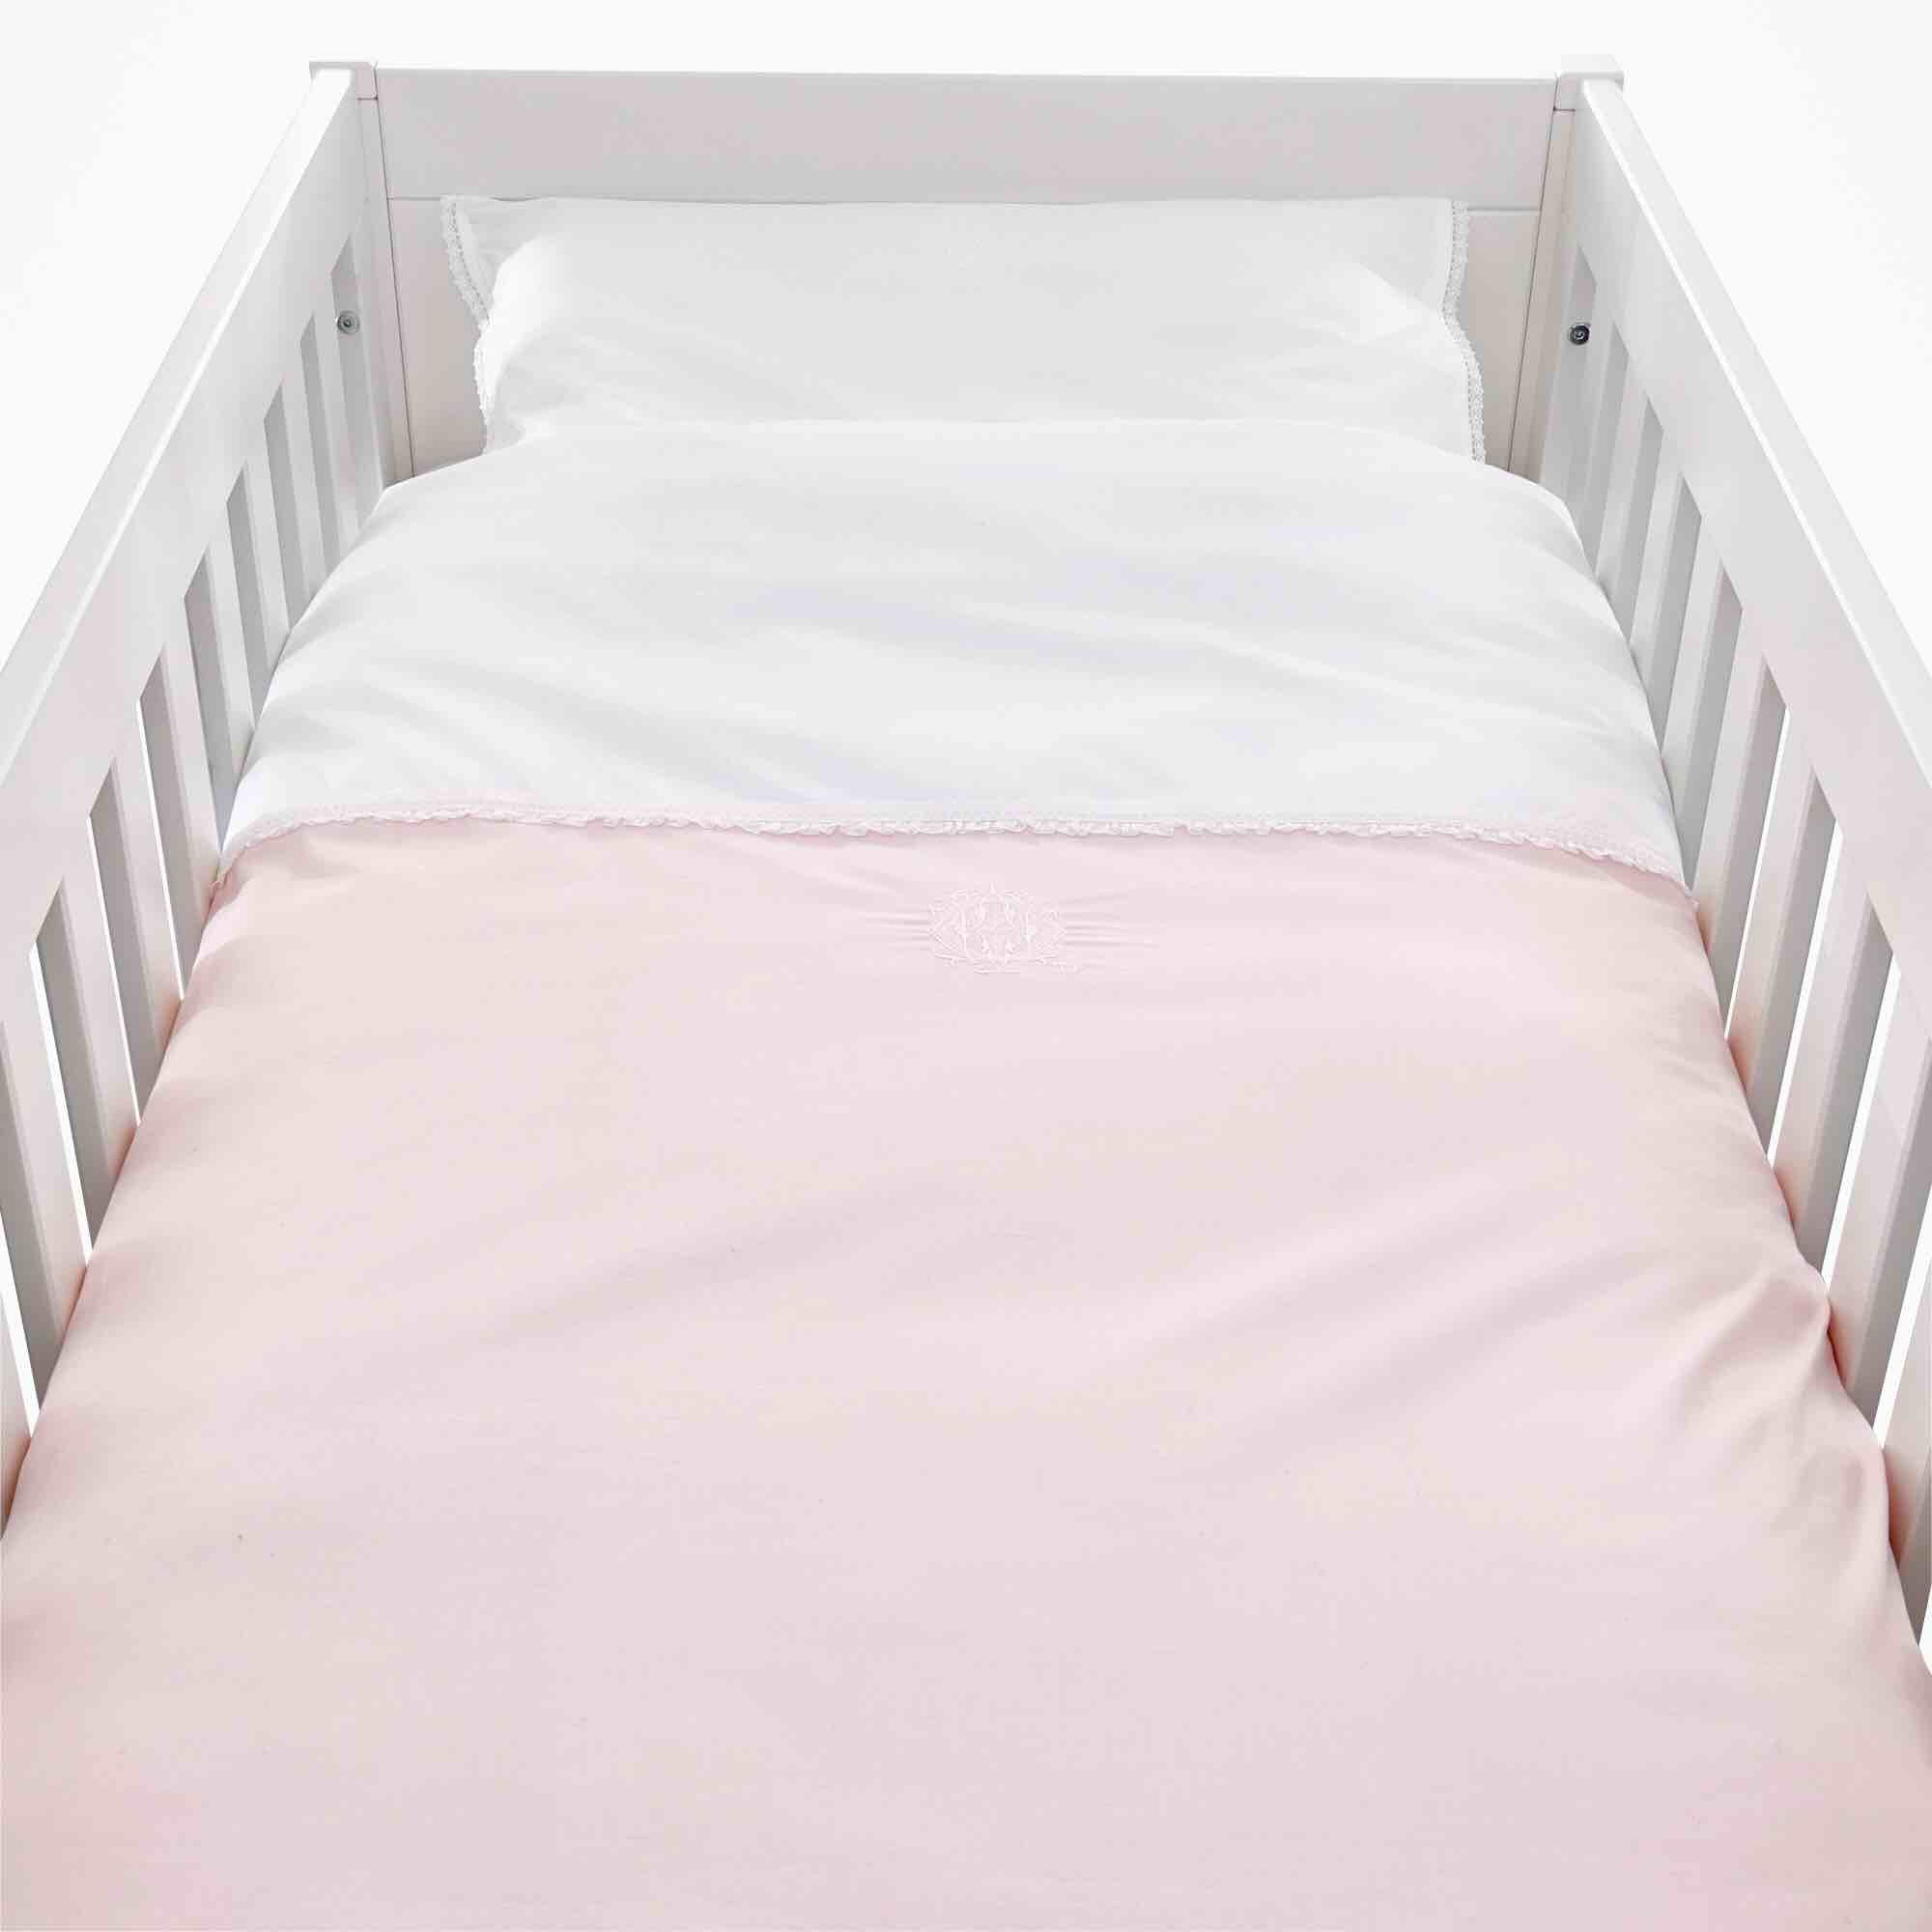 Theophile & Patachou Cot Bed Duvet Cover - Royal Pink